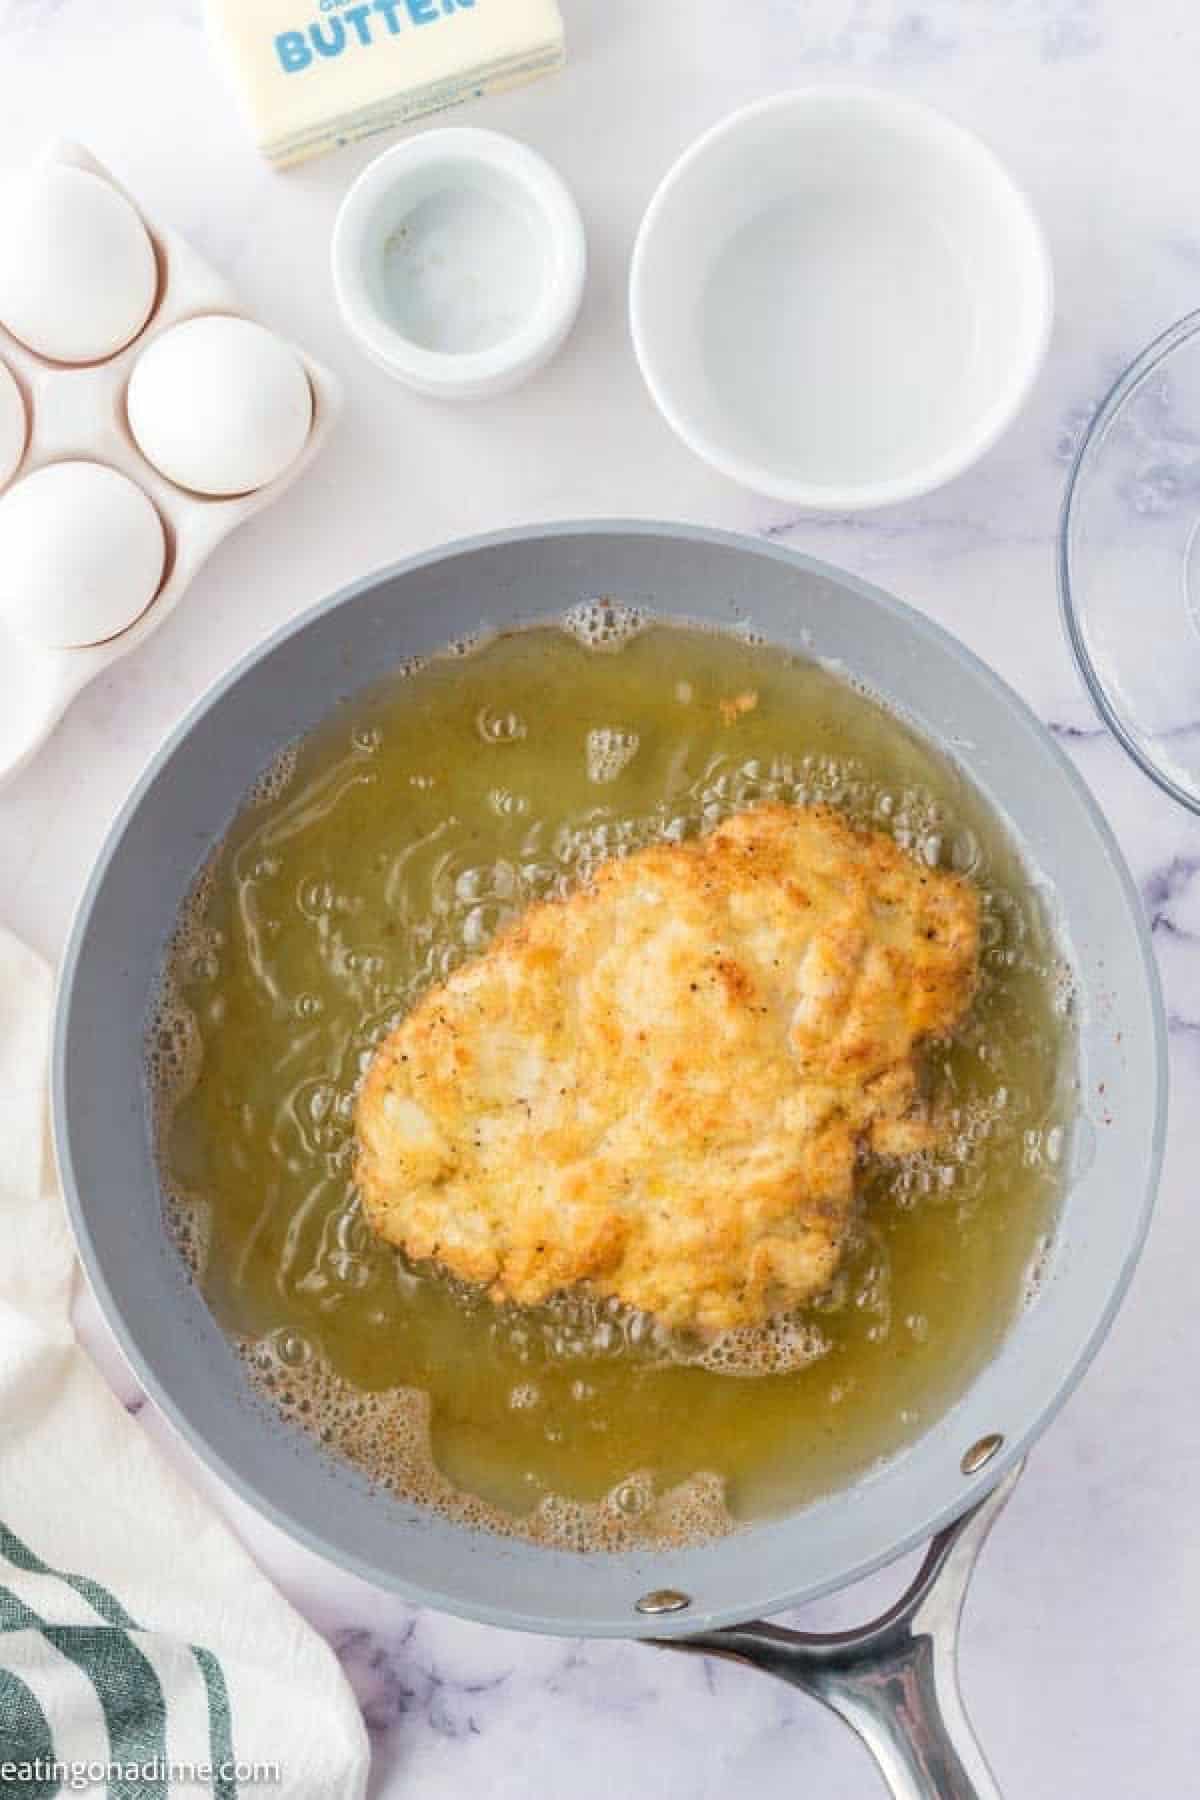 Frying chicken fried chicken in a skillet with hot oil